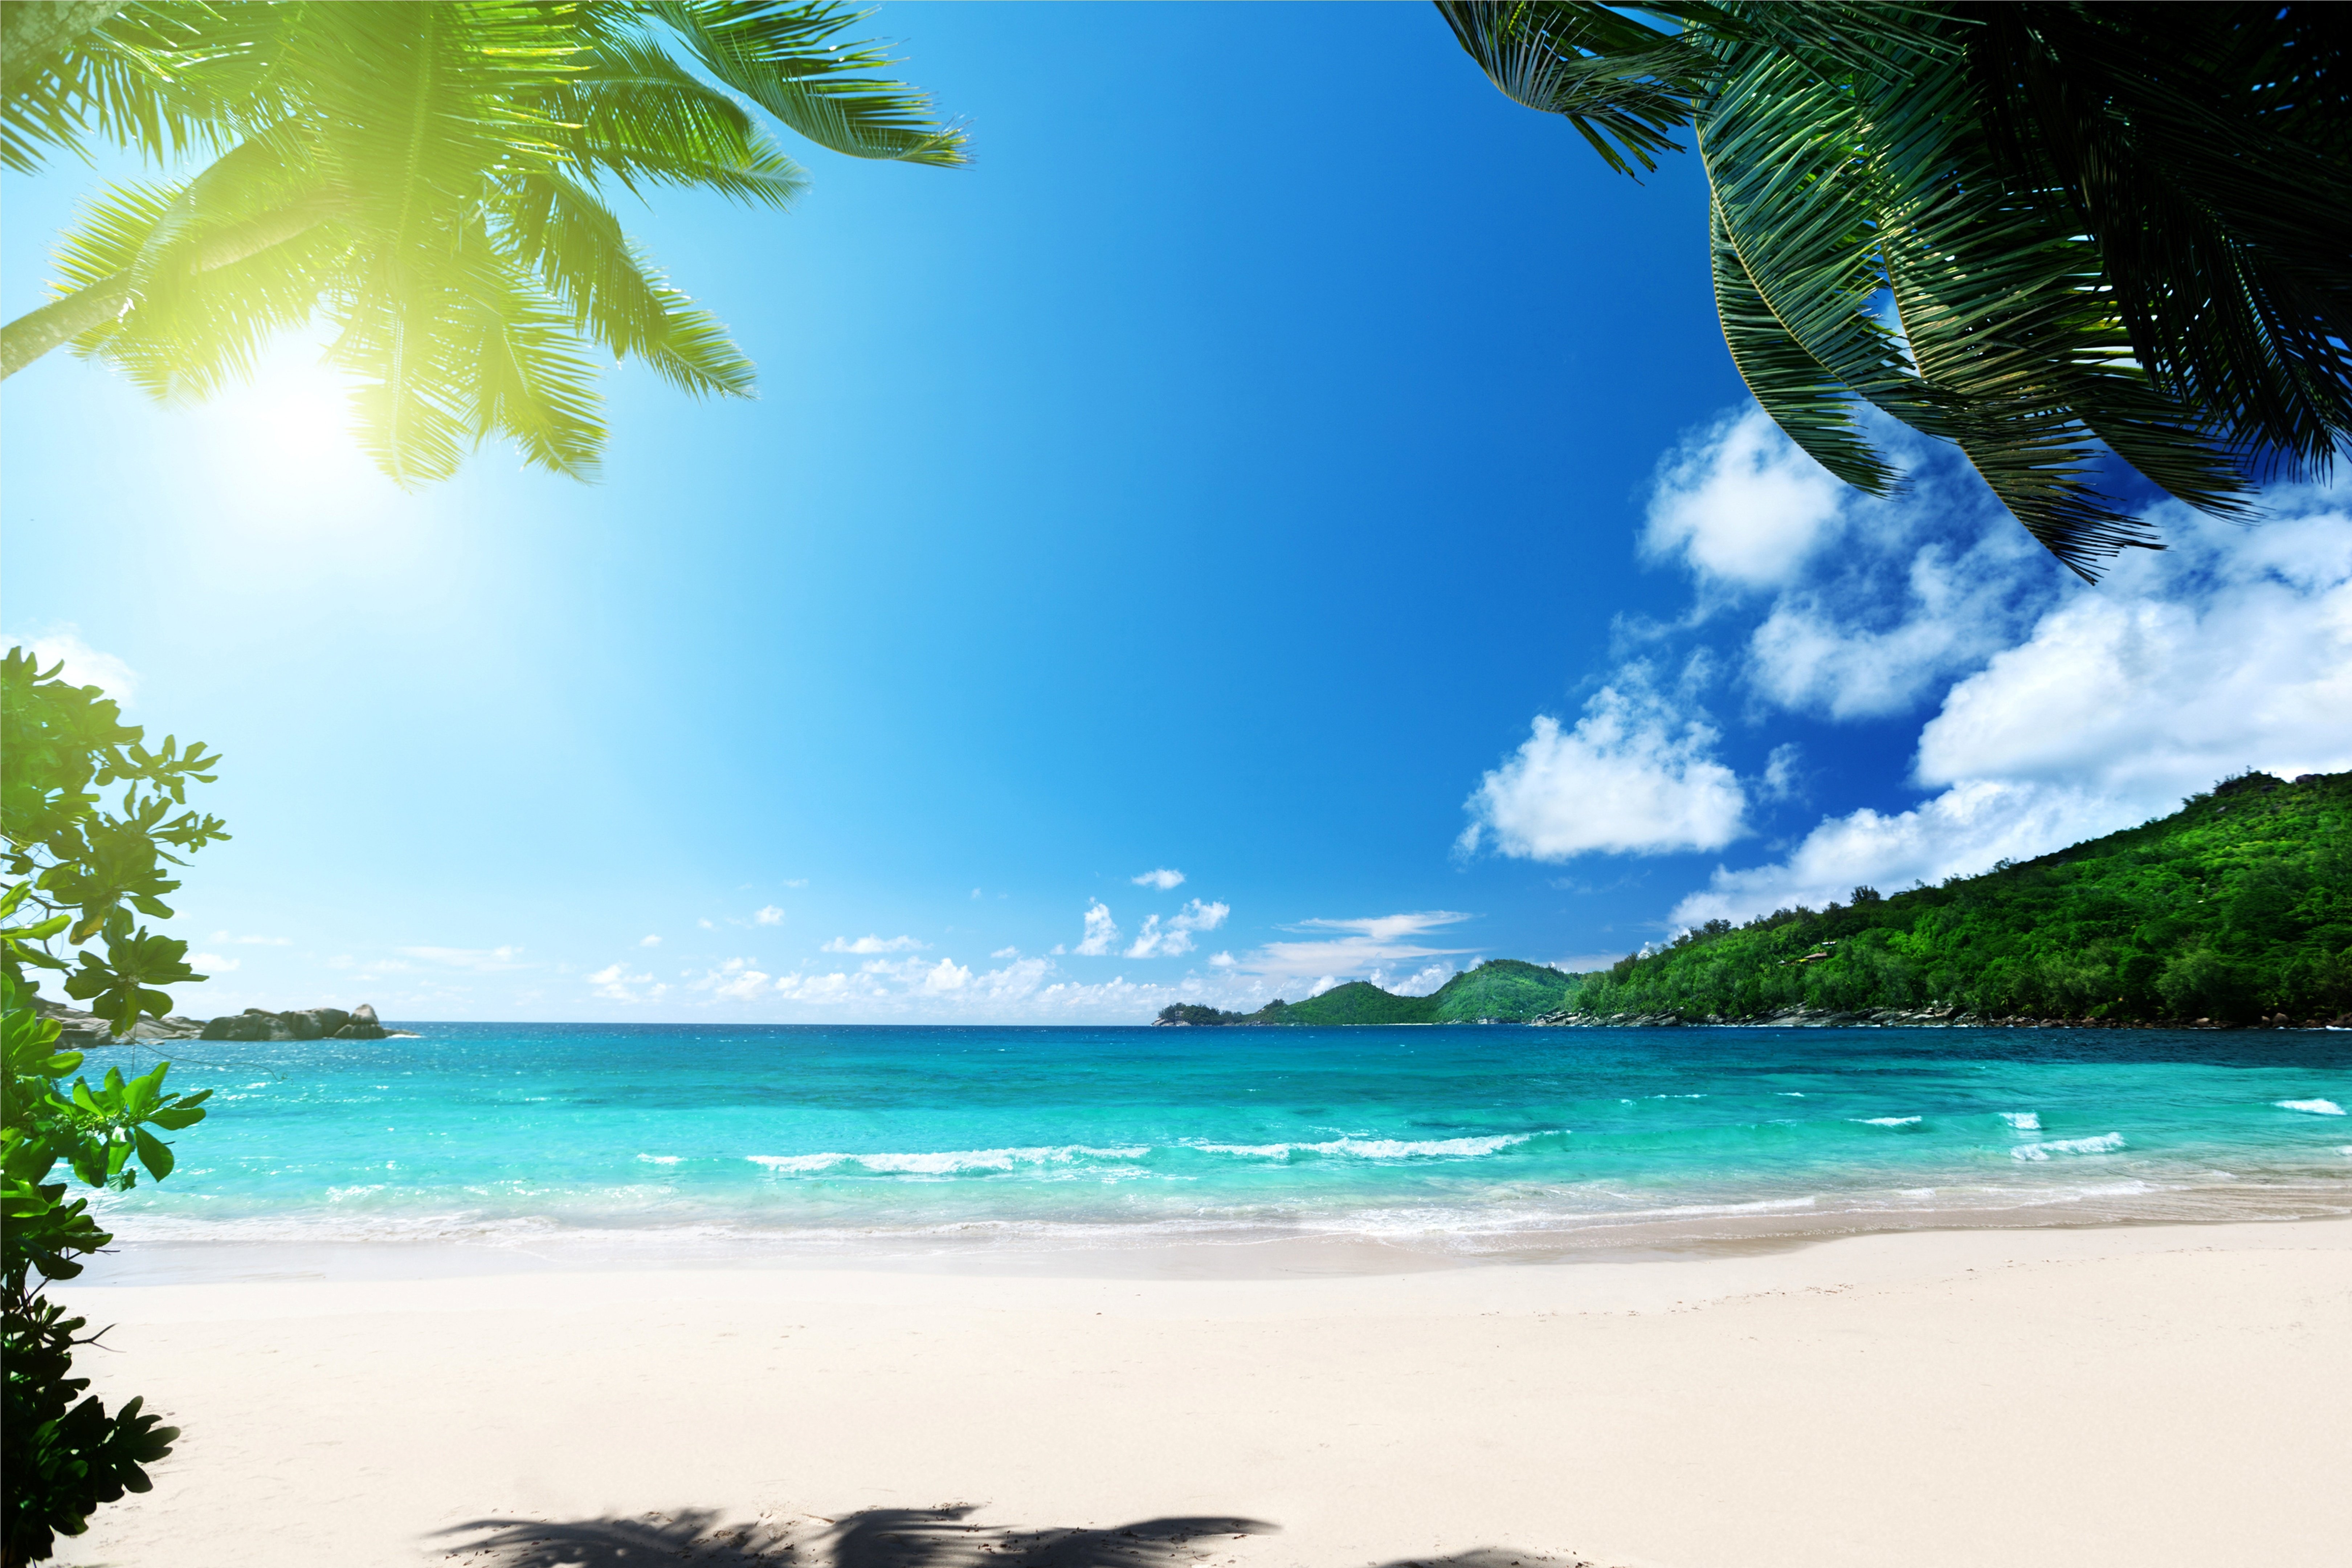 [60+] Tropical Background Pictures on WallpaperSafari6480 x 4320